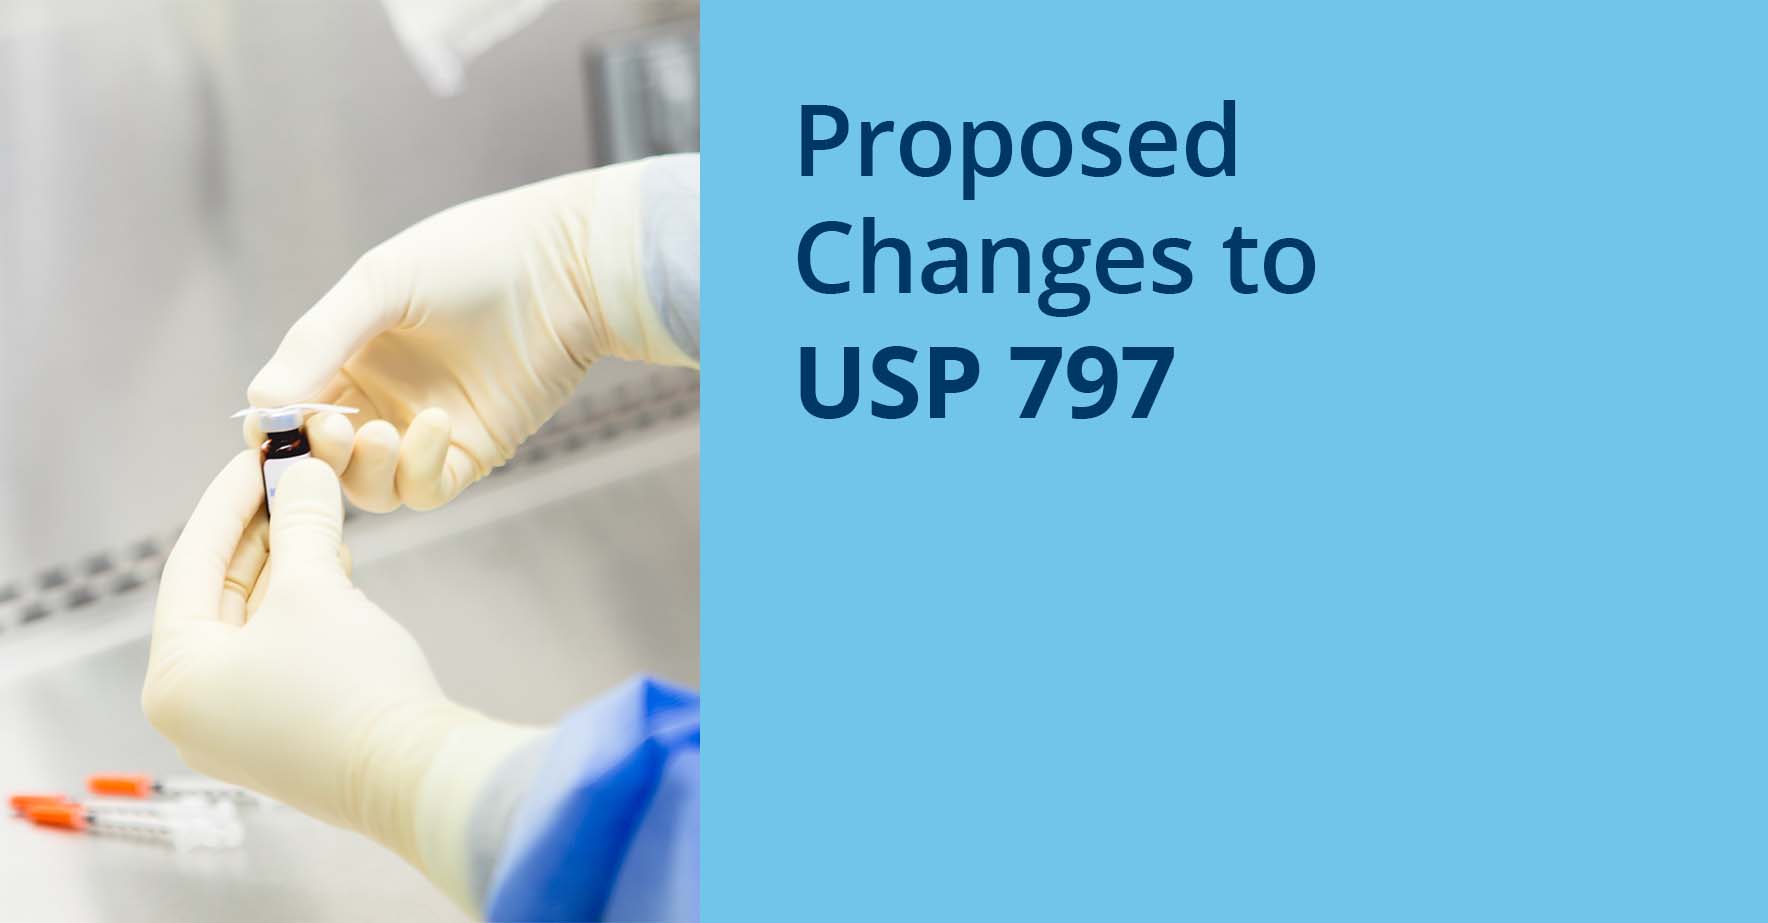 Proposed_Changes_to_USP_797.jpg